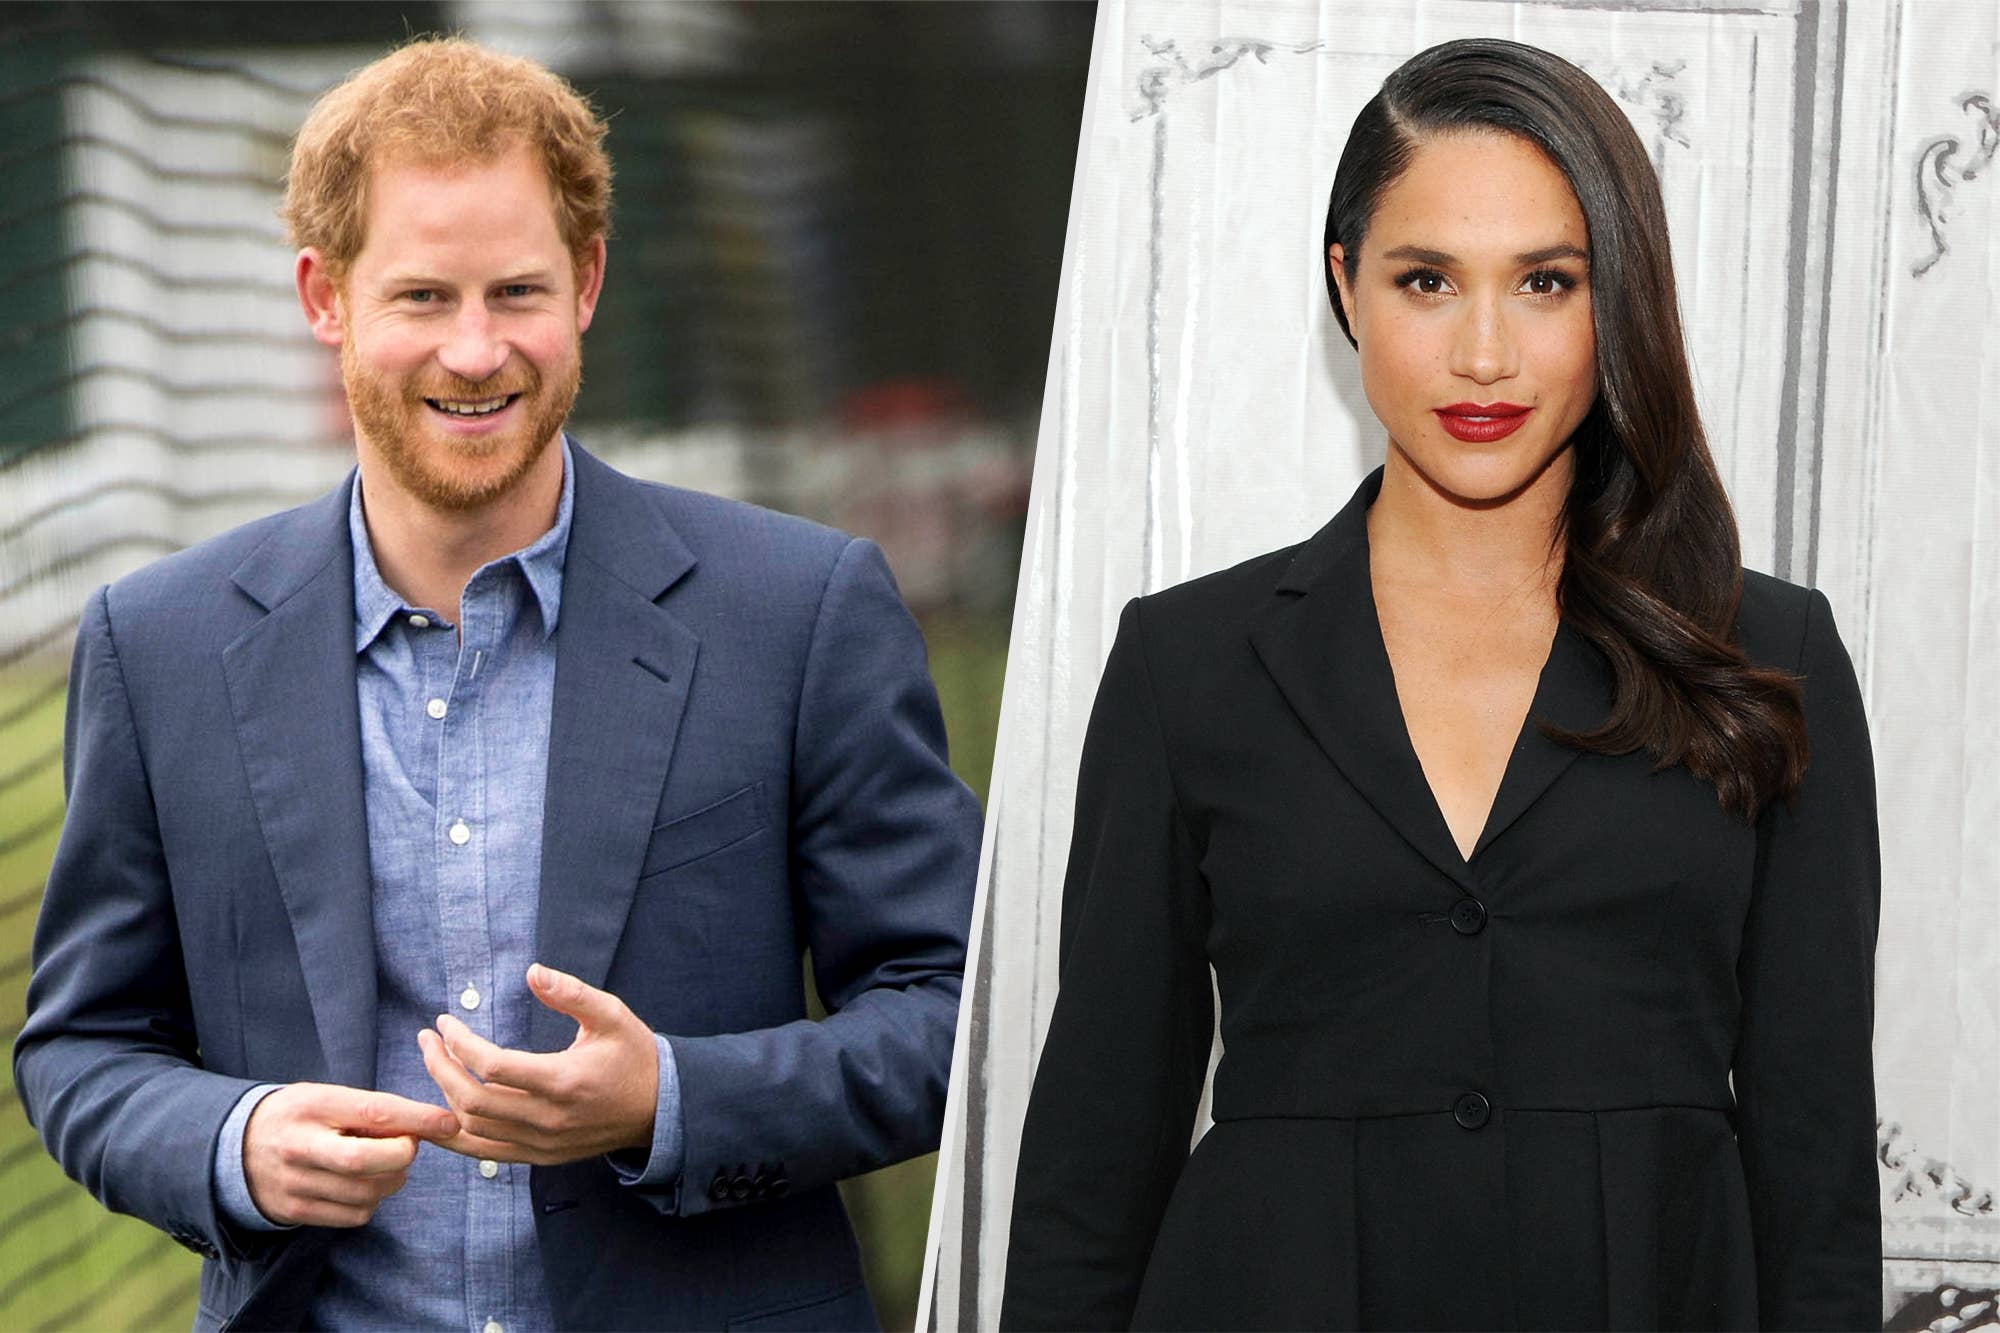 Prince Harry Blasts Media Over Coverage Of His Girlfriend, Meghan Markle